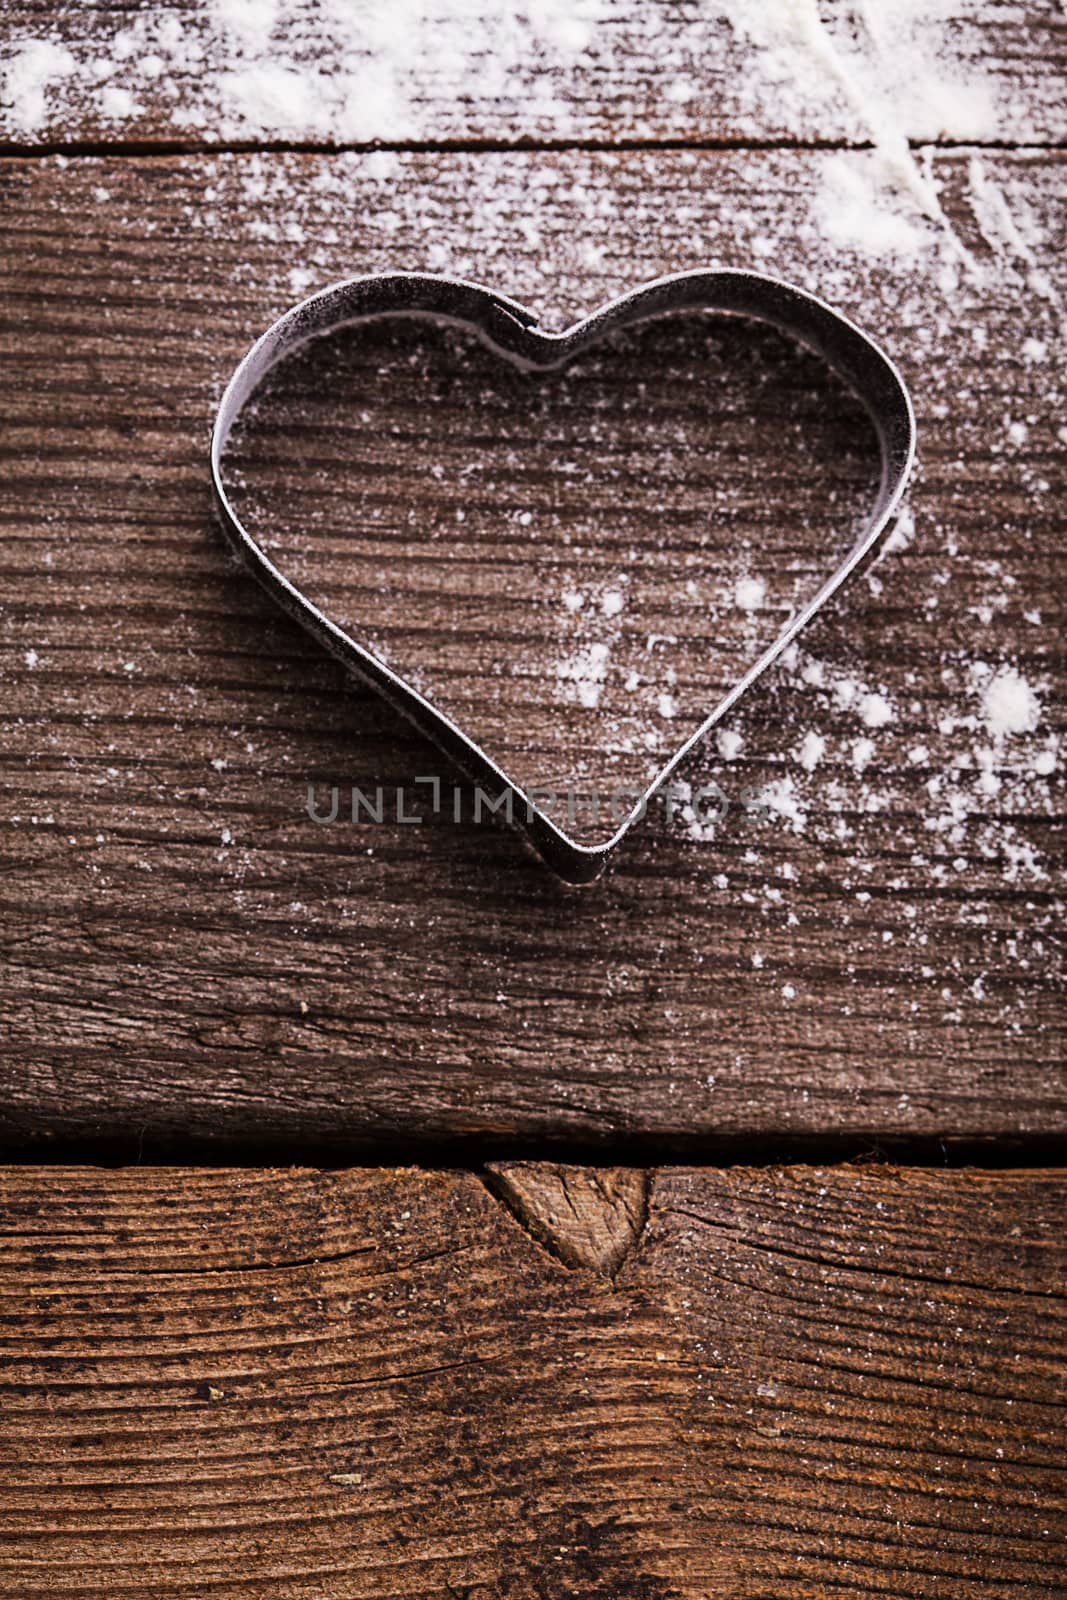 Cookie cutter heart shape on the kitchen table and flour